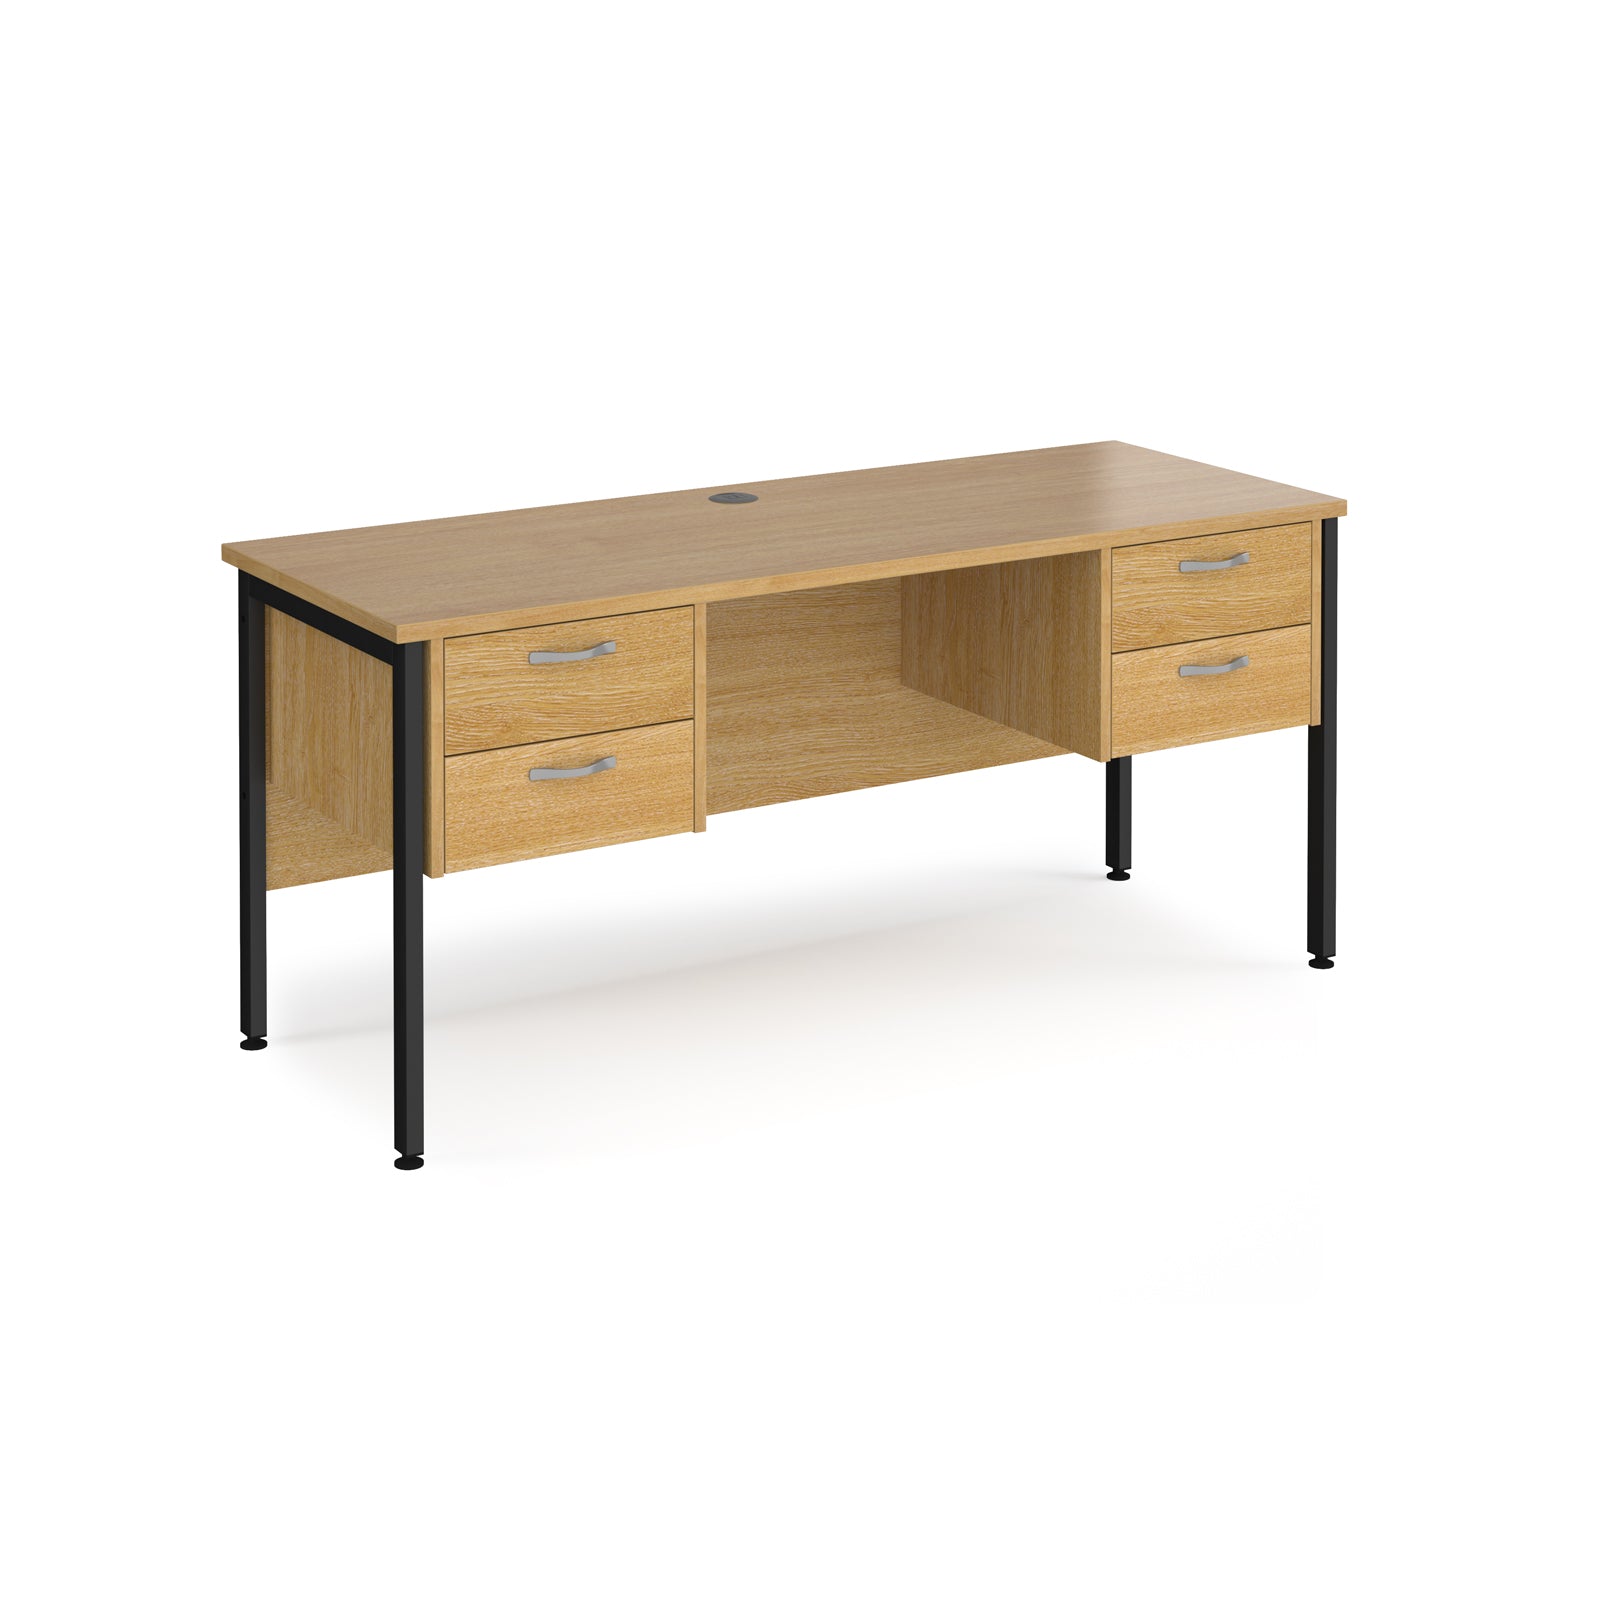 Maestro 600mm Deep Straight H Office Desk with Two and Two Drawer Pedestal